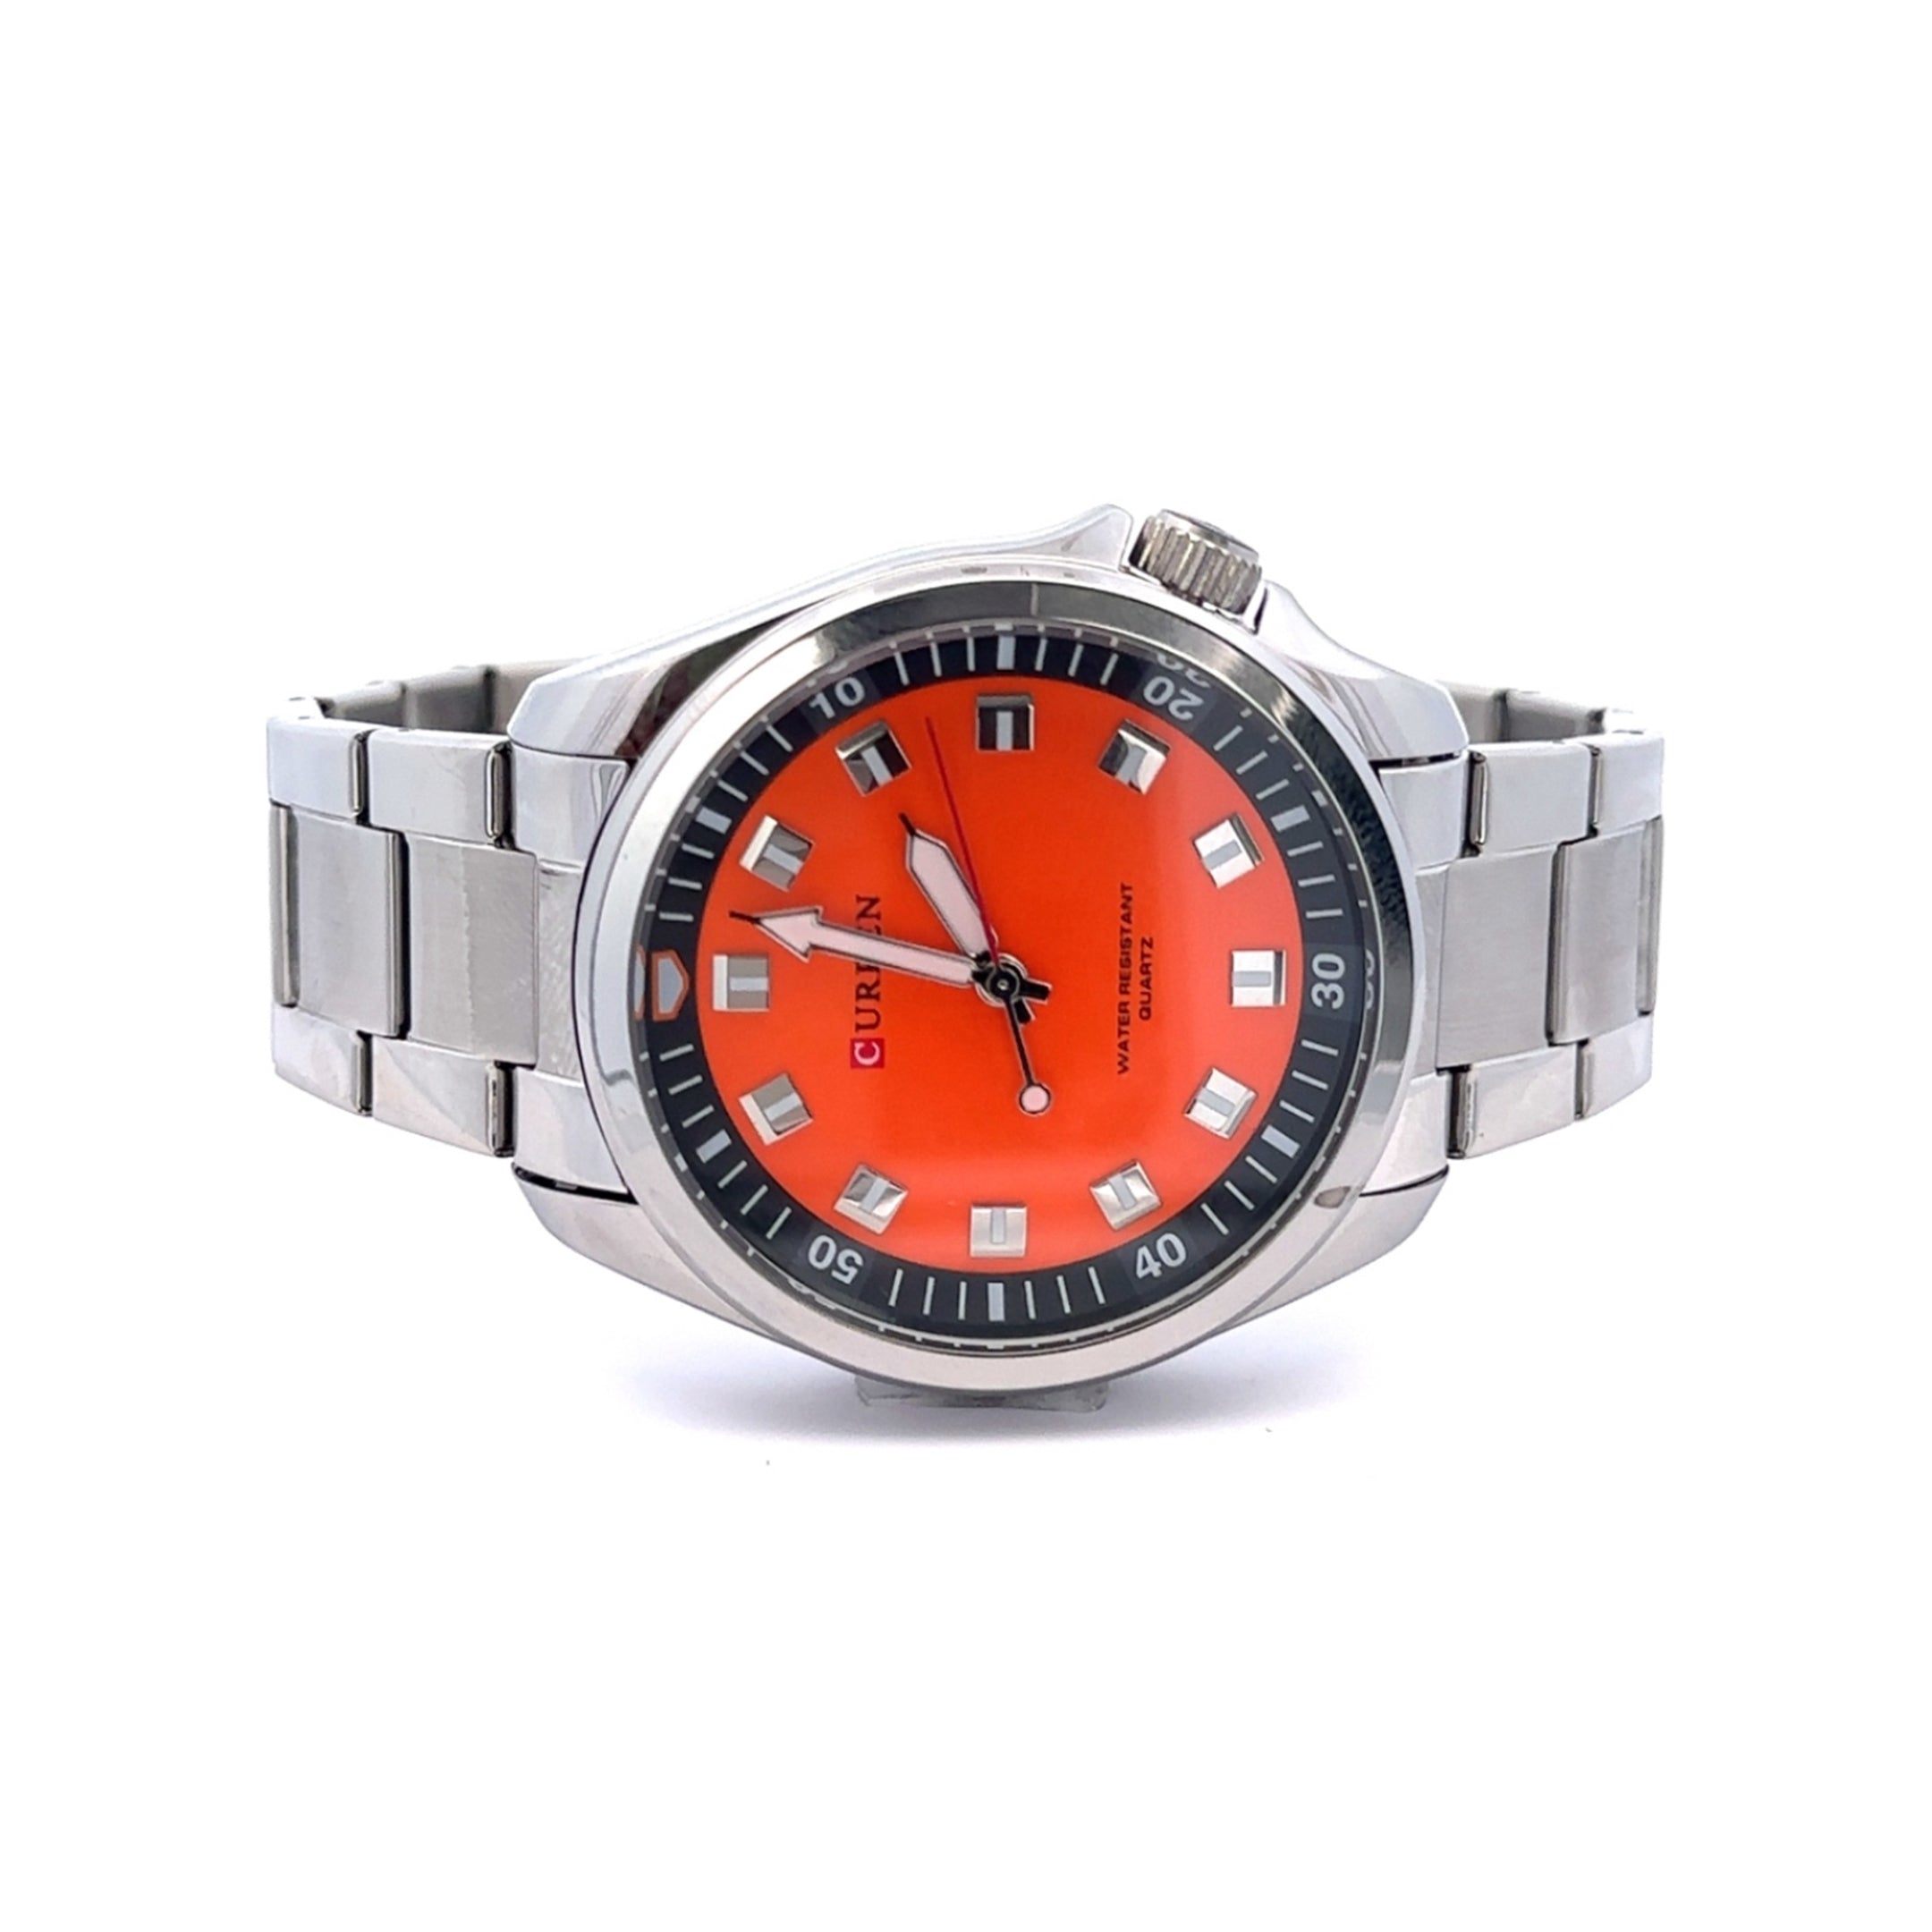 VESTIGE METAL BACK ORANGE STAINLESS ICED OUT WATCH I 5517919